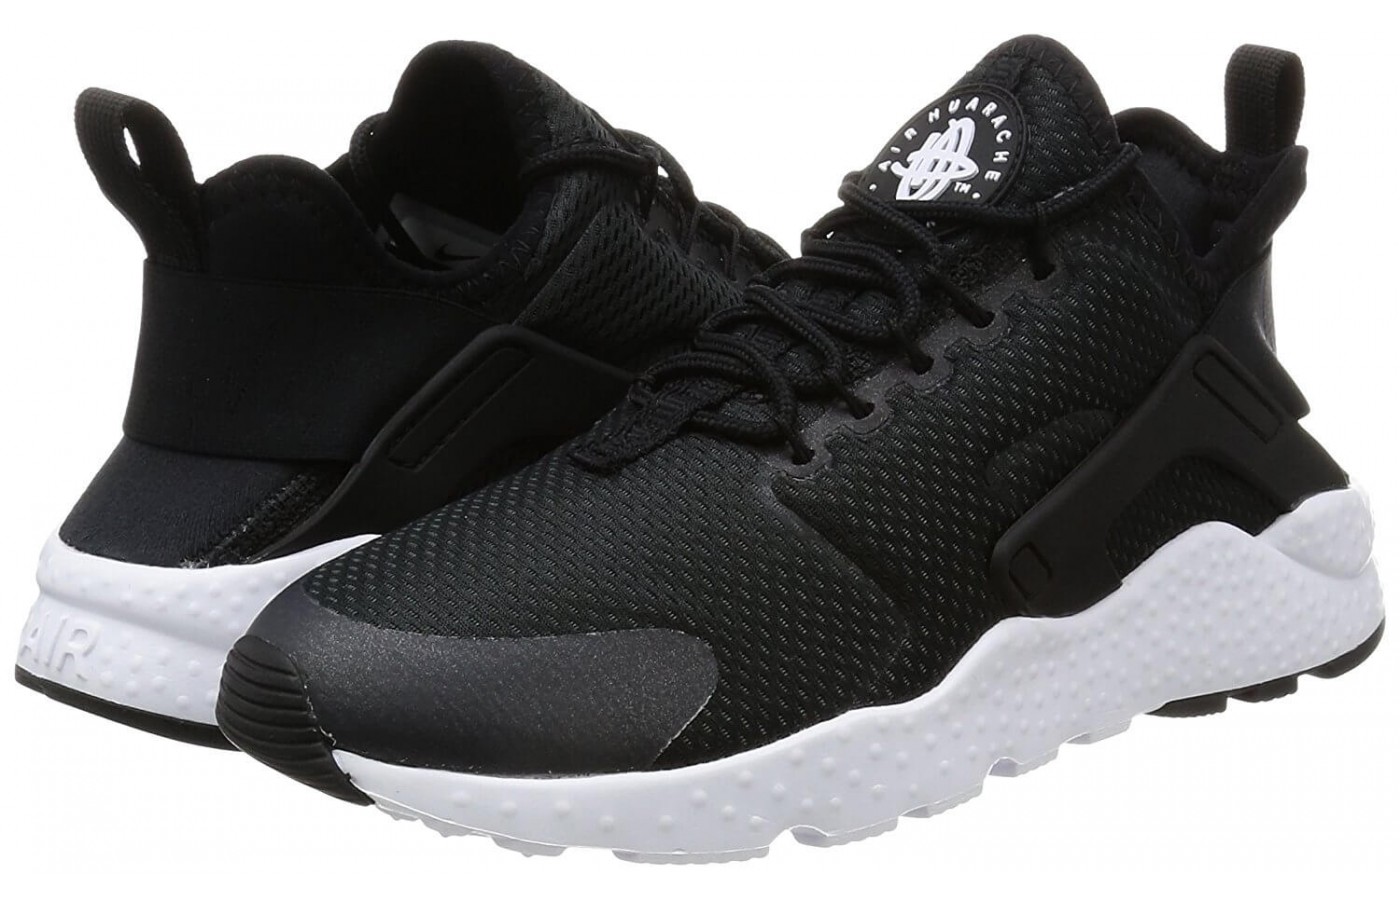 The Nike Air Huarache Ultra has slight variations between the men's and women's versions.